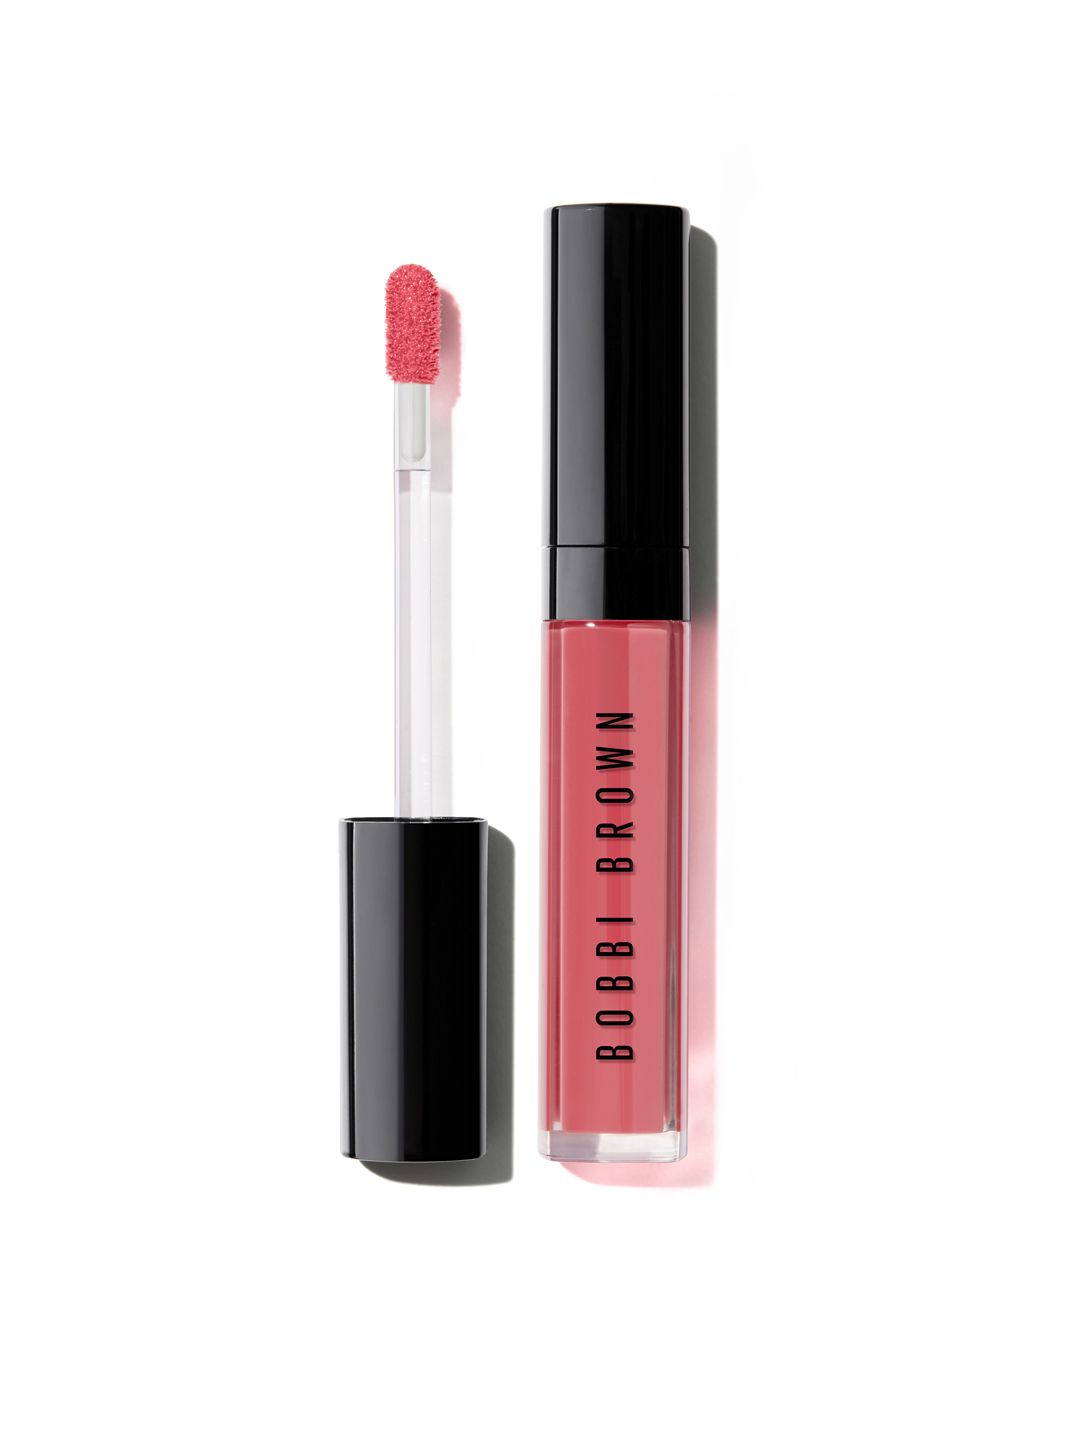 Bobbi Brown Crushed Oil Infused Gloss - Love Letter 6 ml Price in India